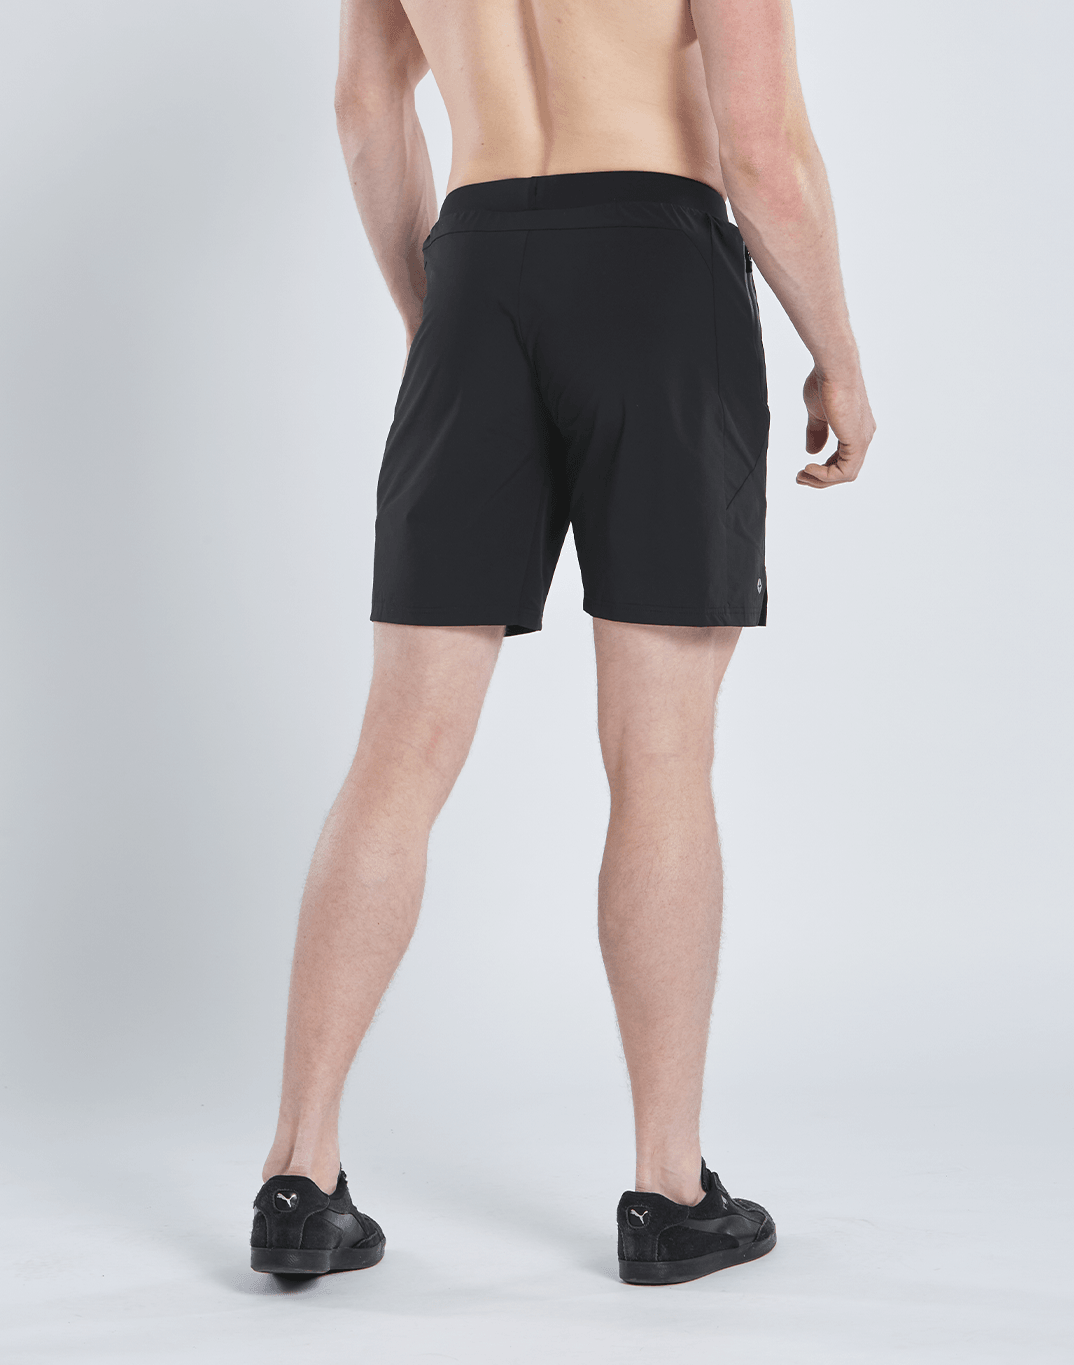 Pace 7" Shorts in Black - Shorts - Gym+Coffee